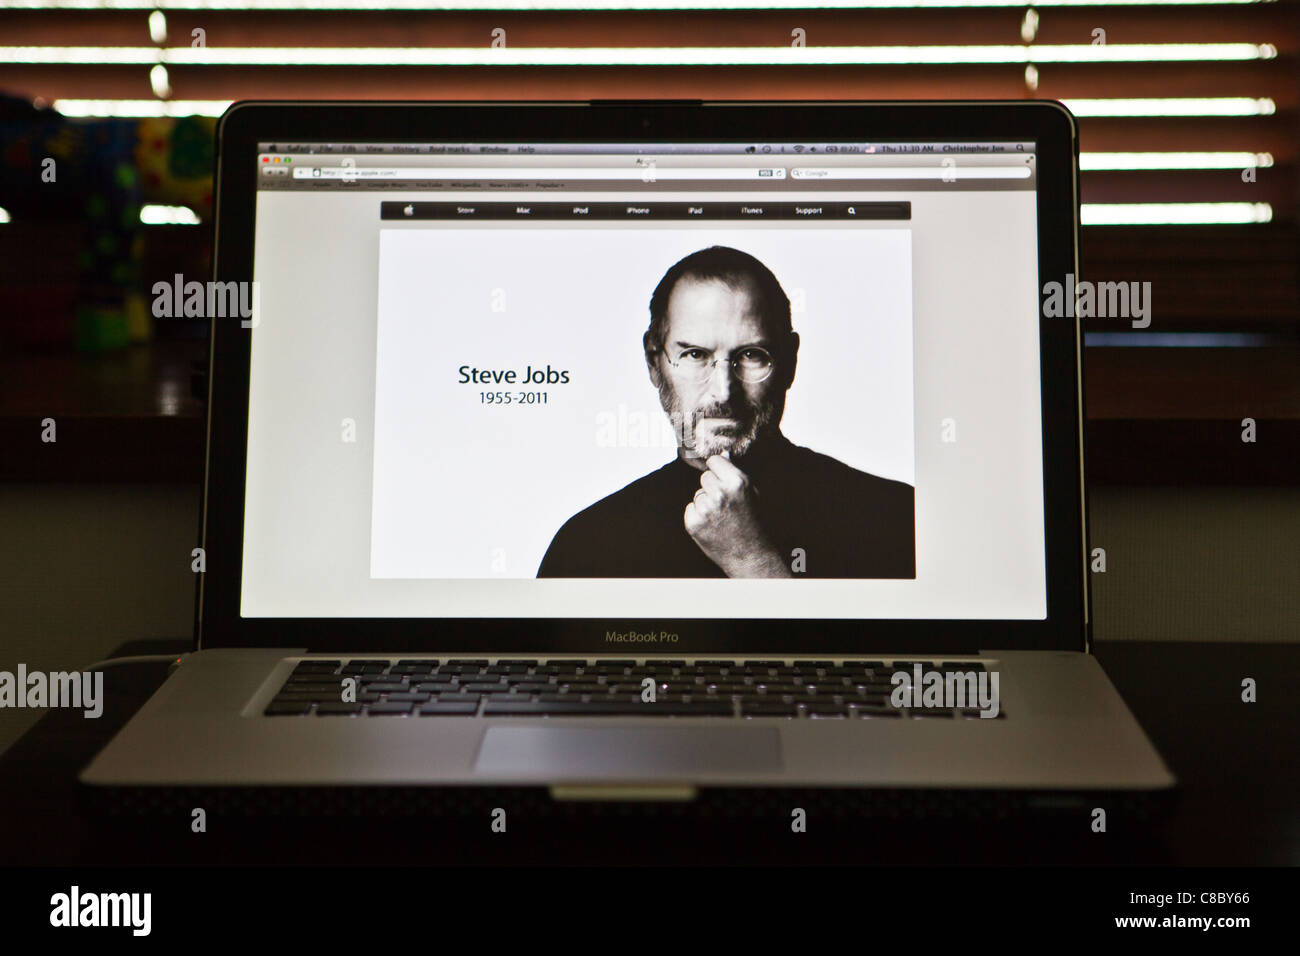 An image of the late Steve Jobs, founder and former CEO of Apple Inc., is displayed on the screen of an Apple Macbook Pro. Stock Photo